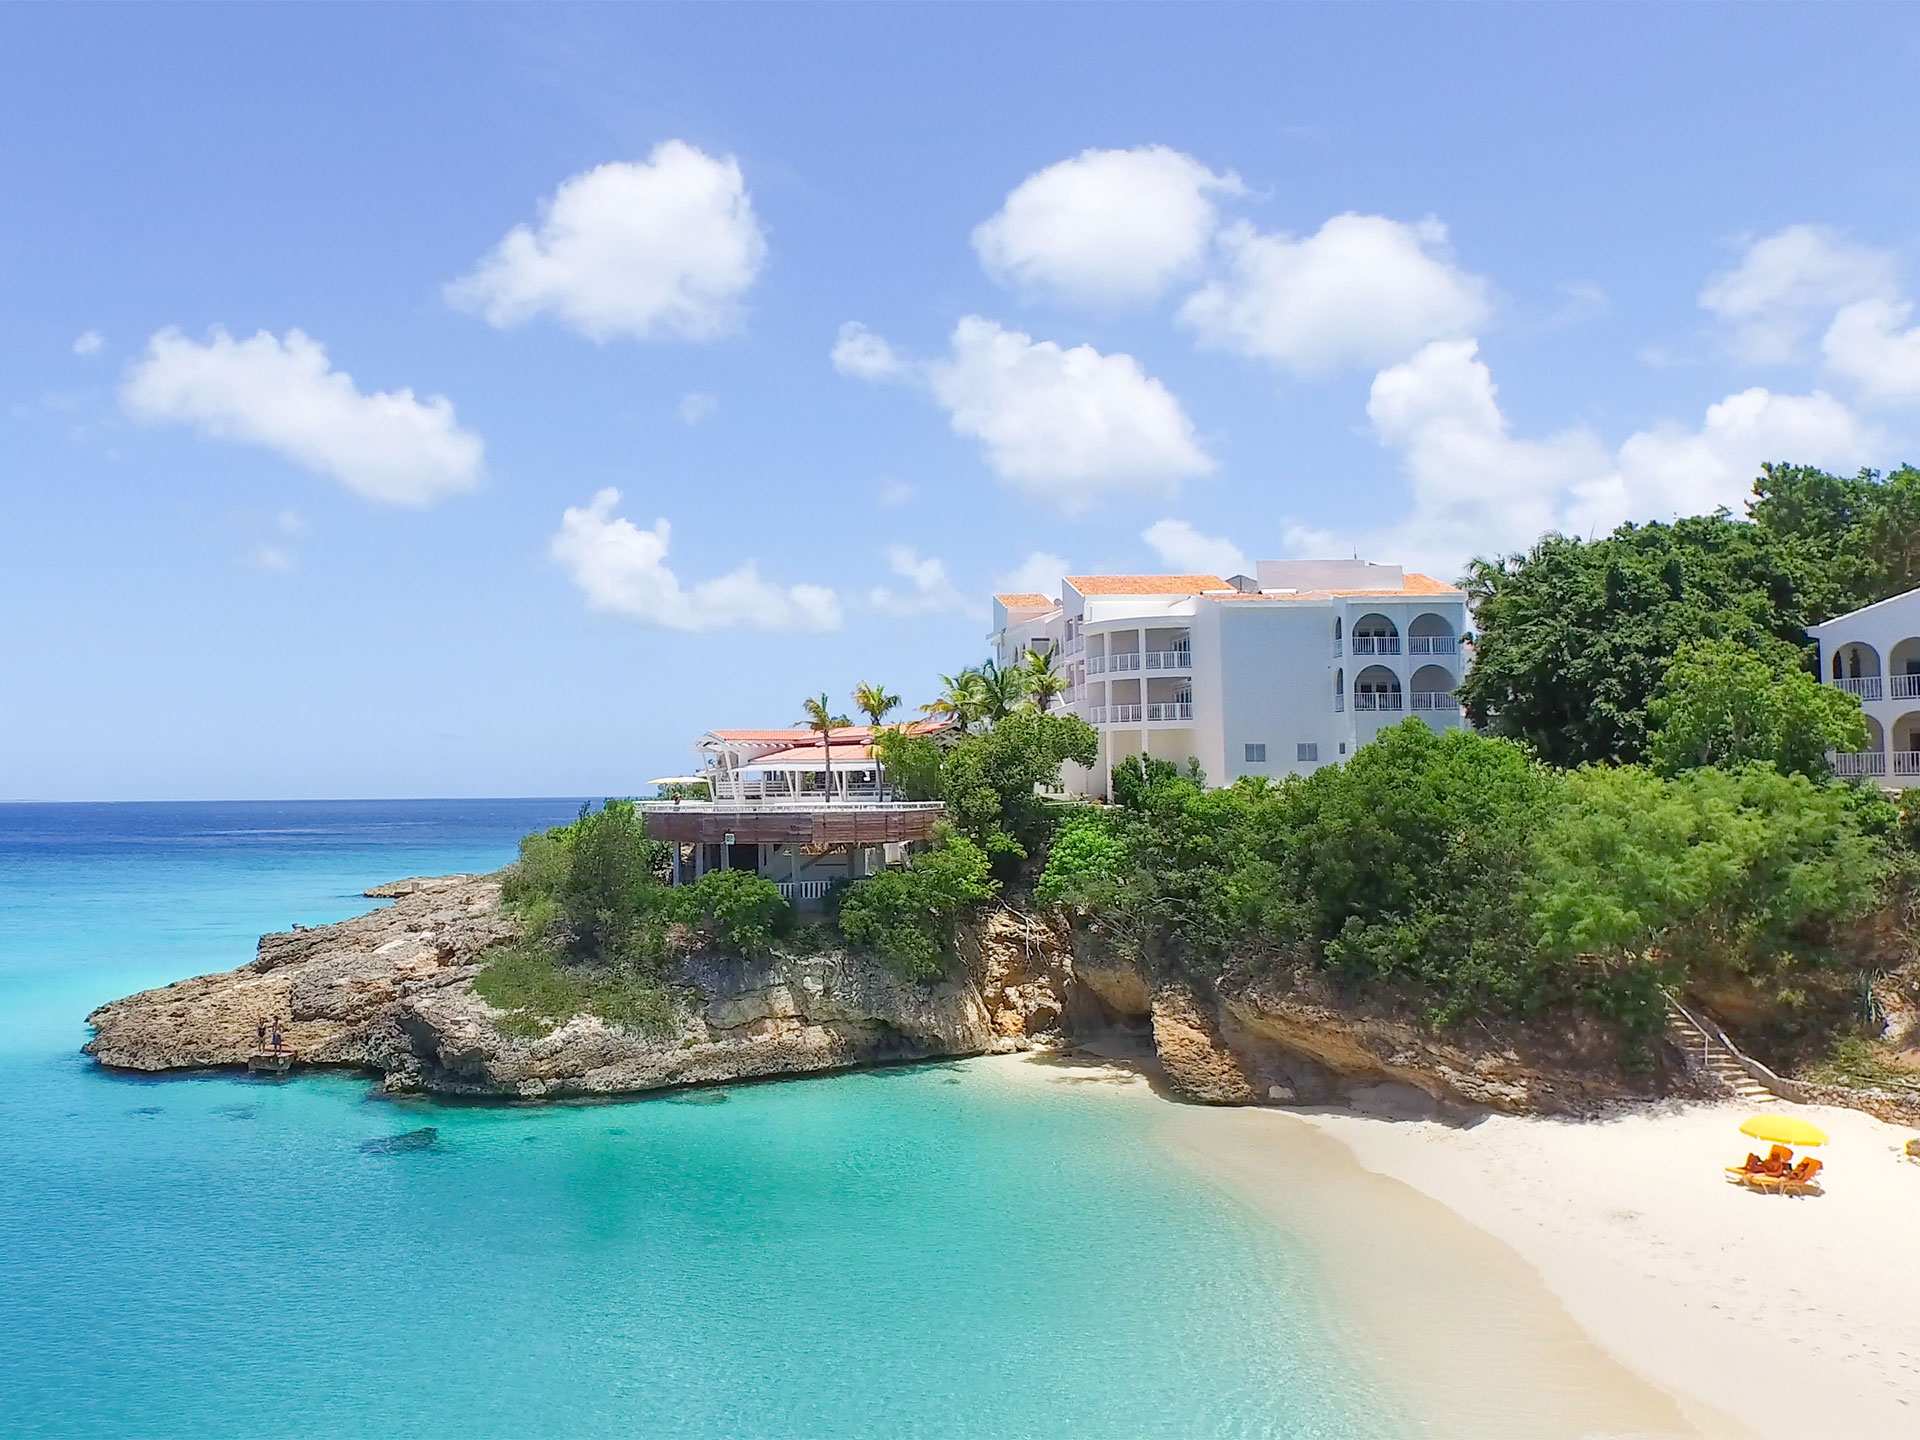 The best things to do in Anguilla | Perched atop a bluff, the stunning Malliouhana